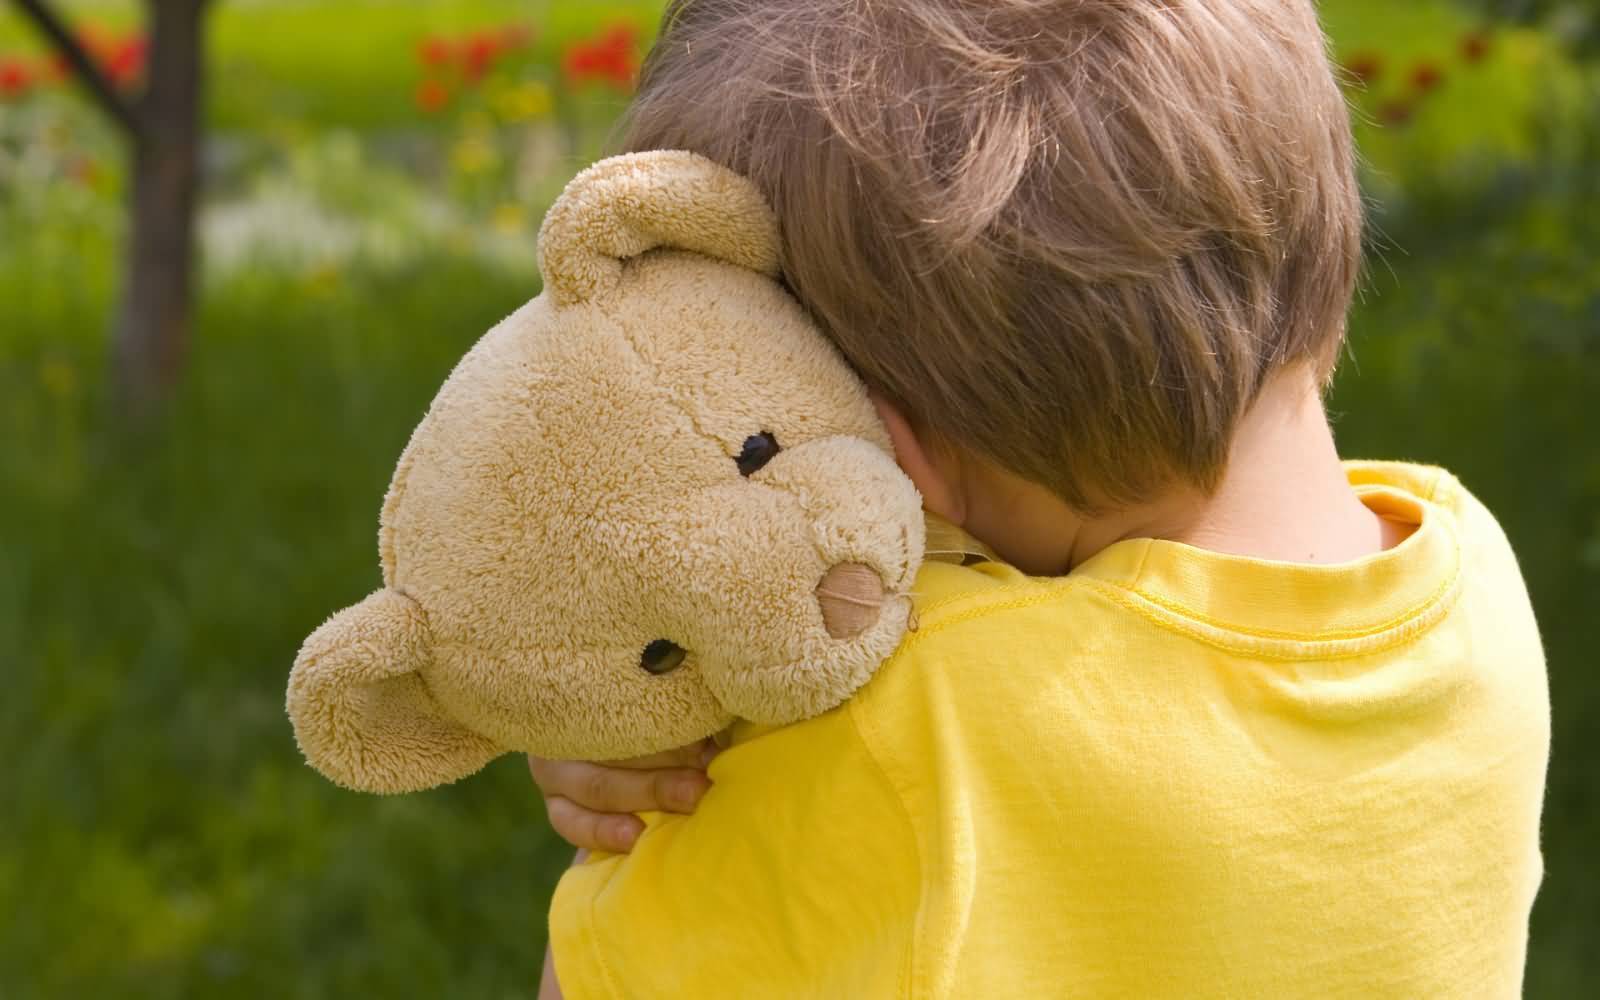 Very Beautiful Baby With A Small Doll Full Hd Wallpaper - Sad Boy With Teddy Bear - HD Wallpaper 